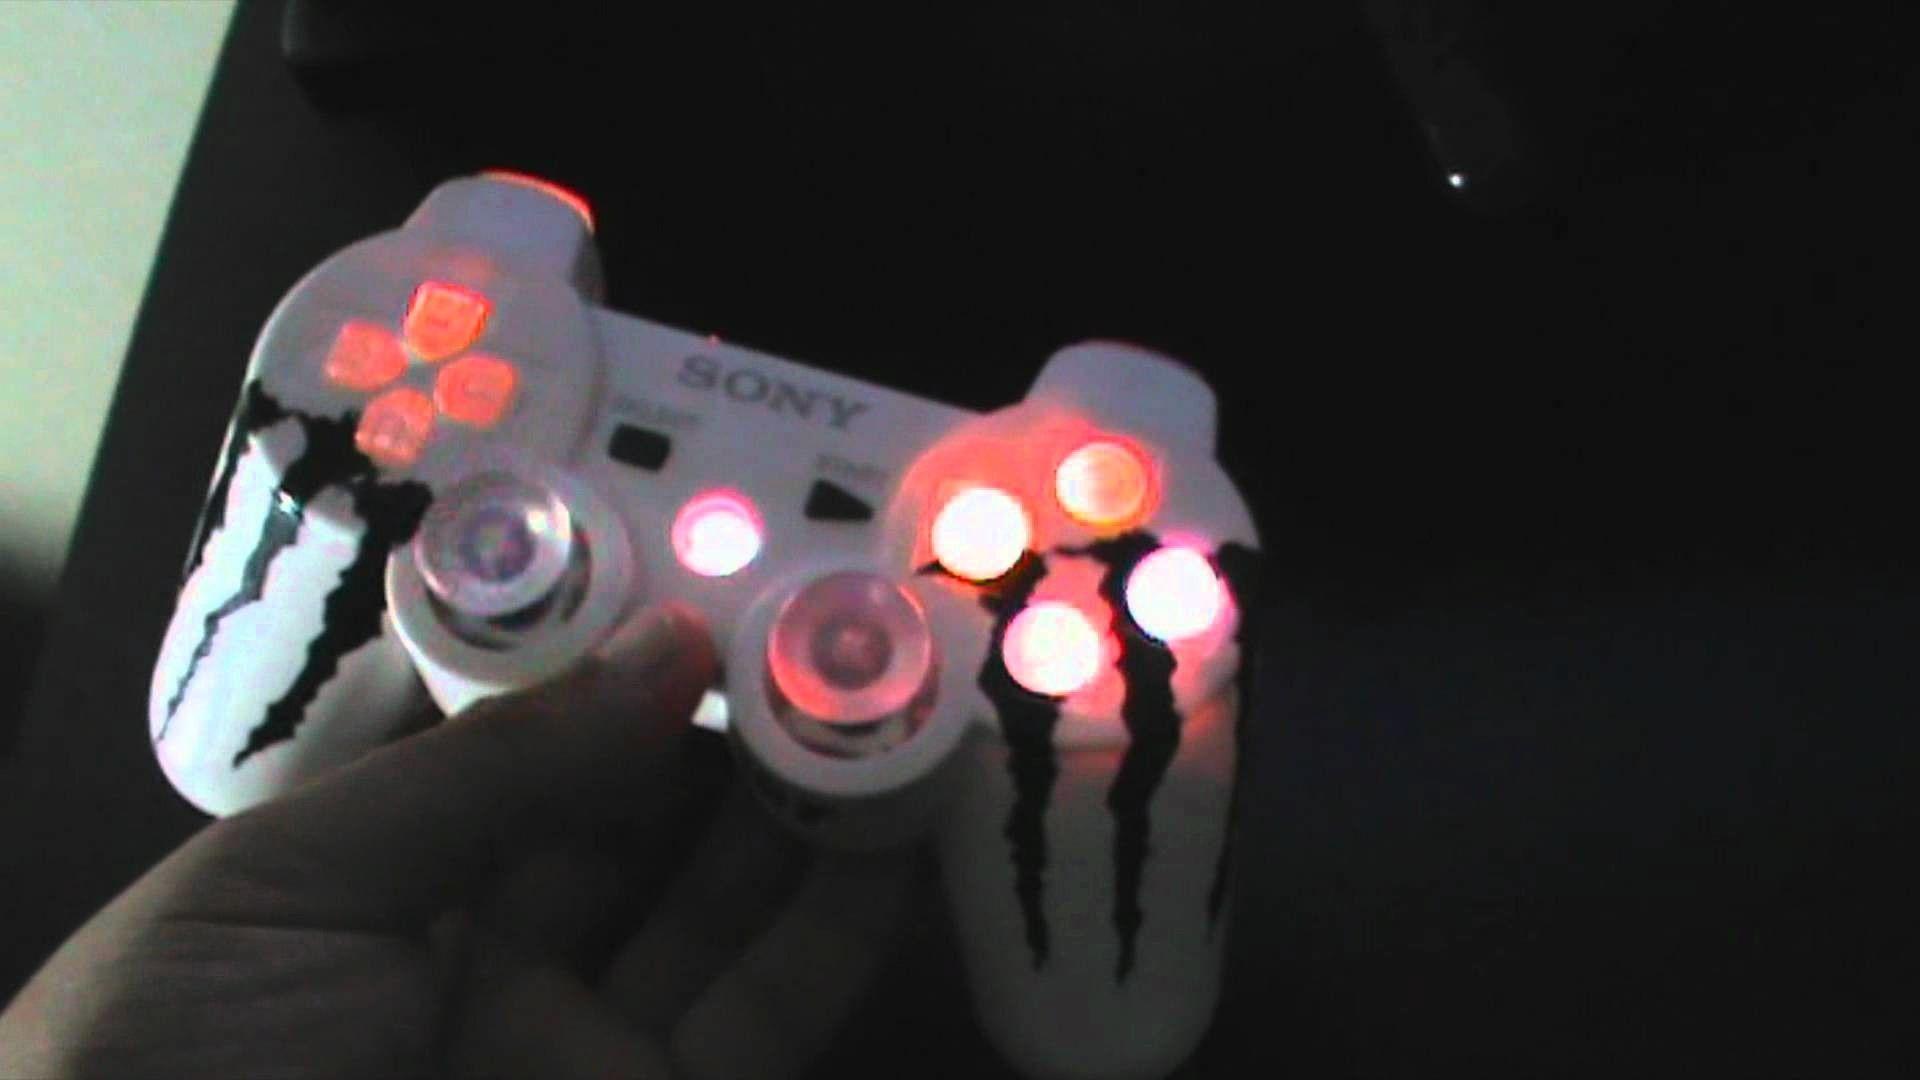 cool ps3 controllers